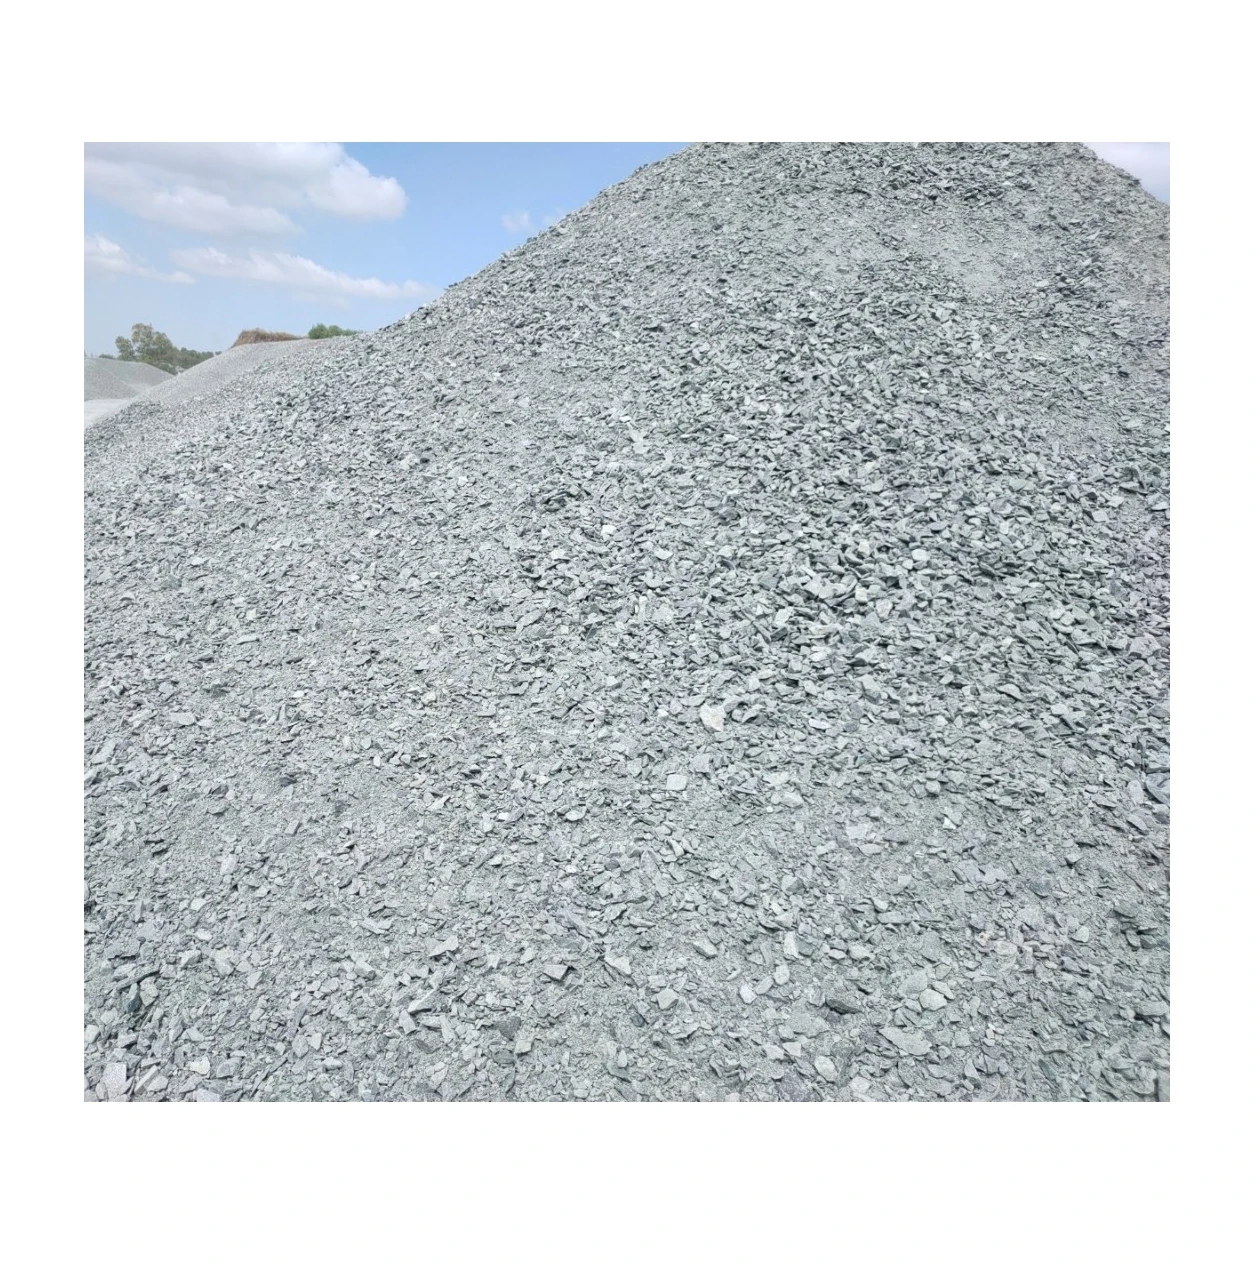 High Quality Crushed Gravel Stone Best Material For Construction Stone Rock Stone Crushing For Road Driveway (10000007023648)